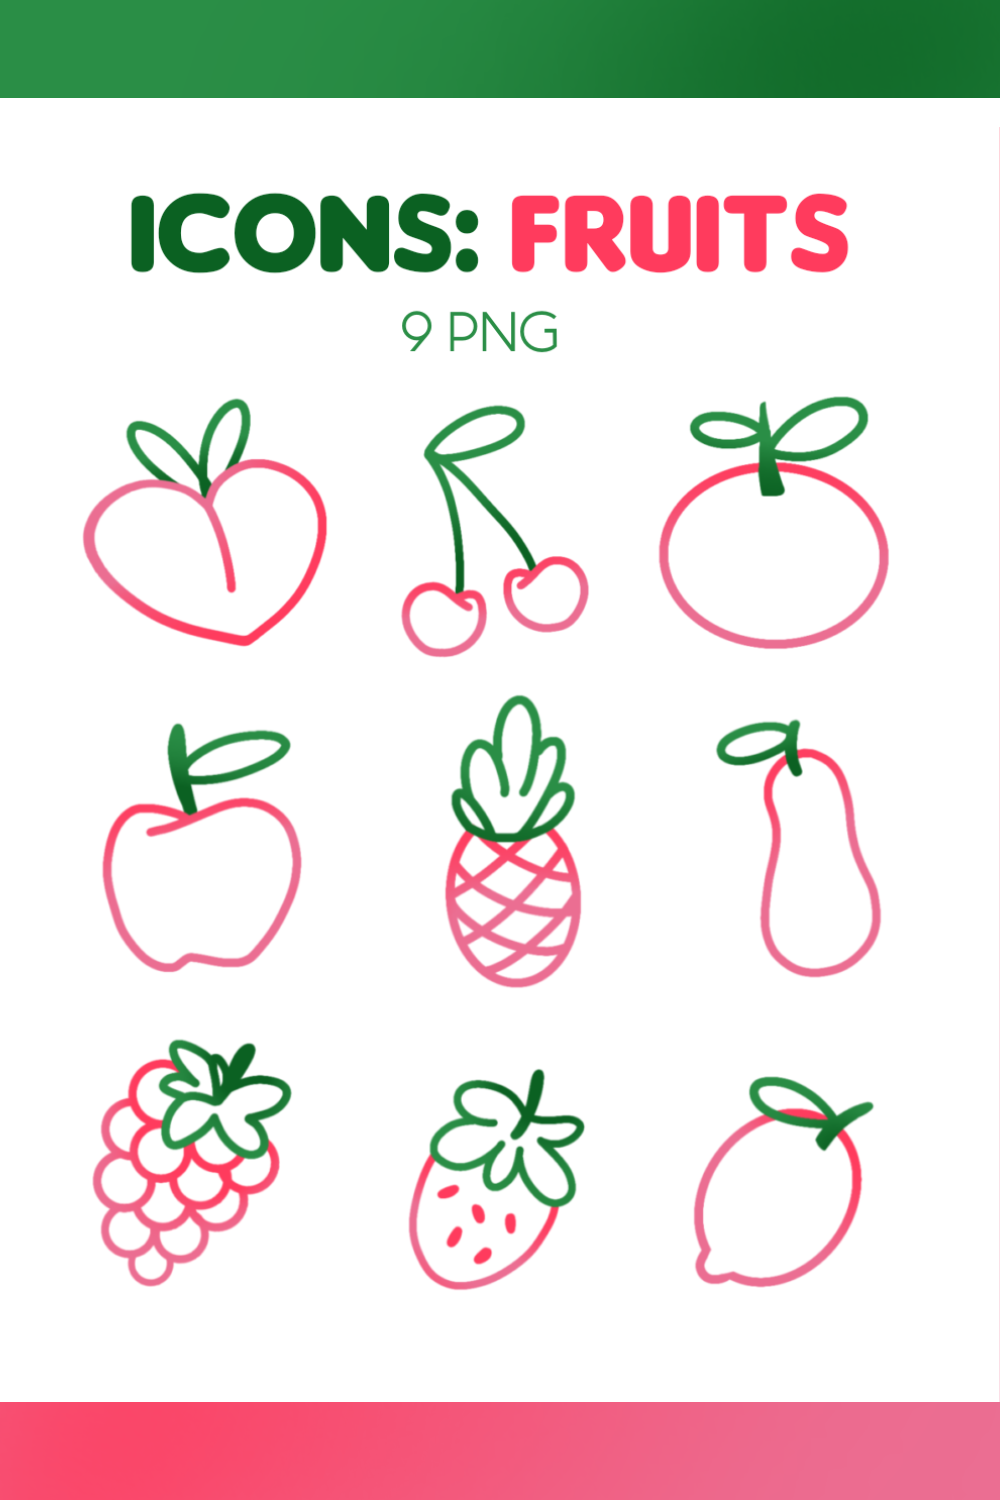 ICONS: FRUITS AND BERRIES (9 PNG) pinterest preview image.